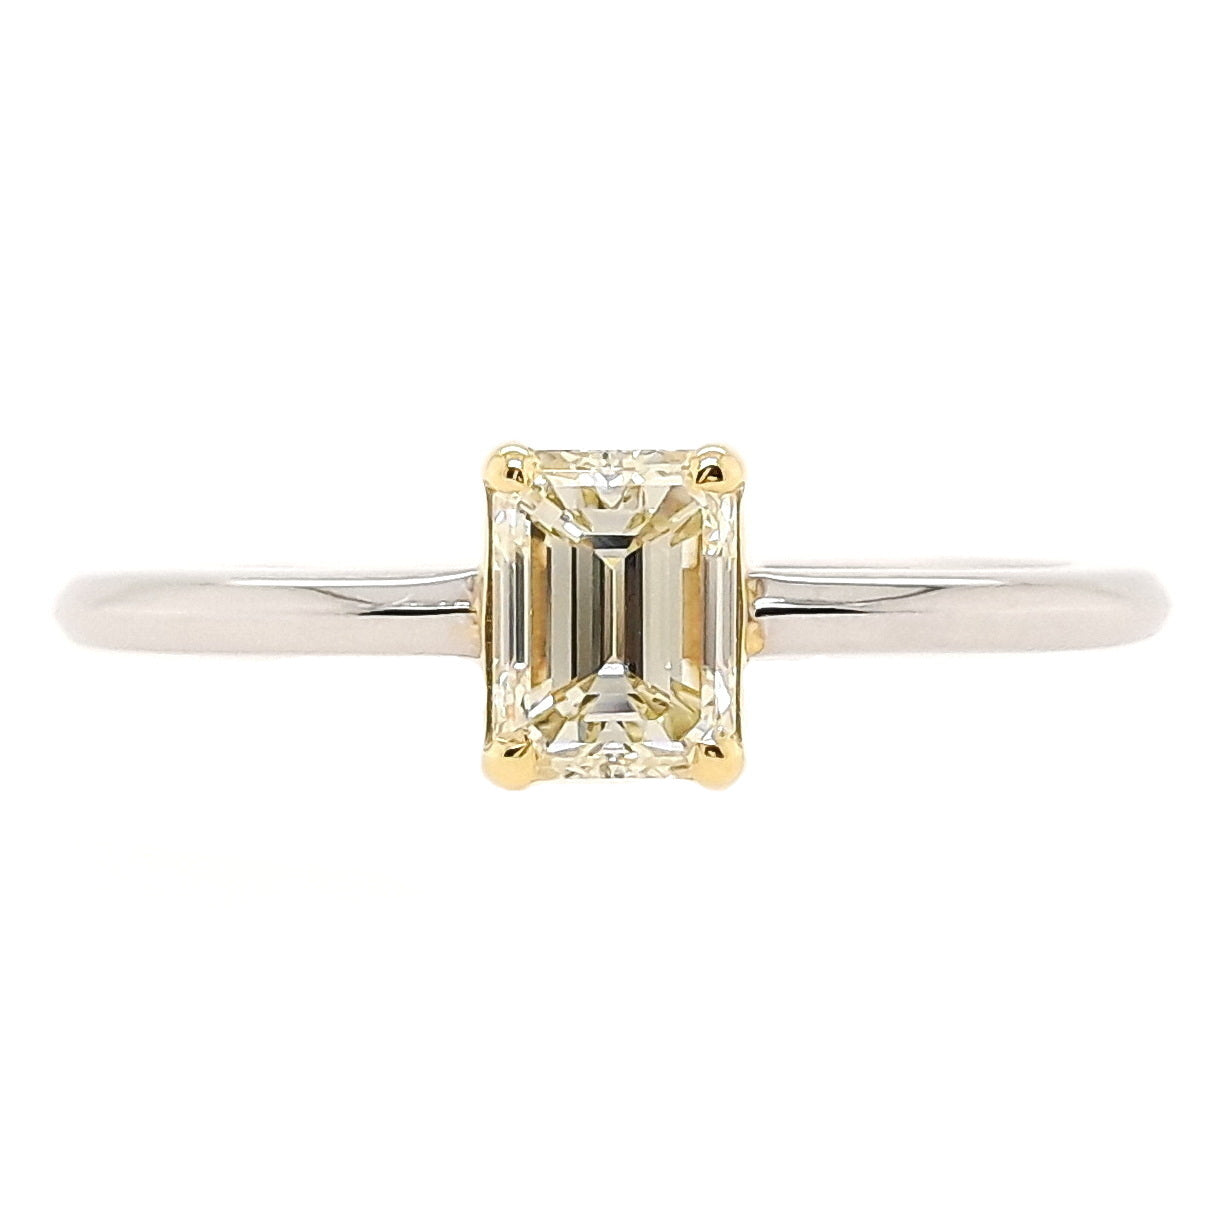 0.60ct NATURAL FANCY COLOR DIAMOND set with 14K Yellow & White Gold Ring - SALE